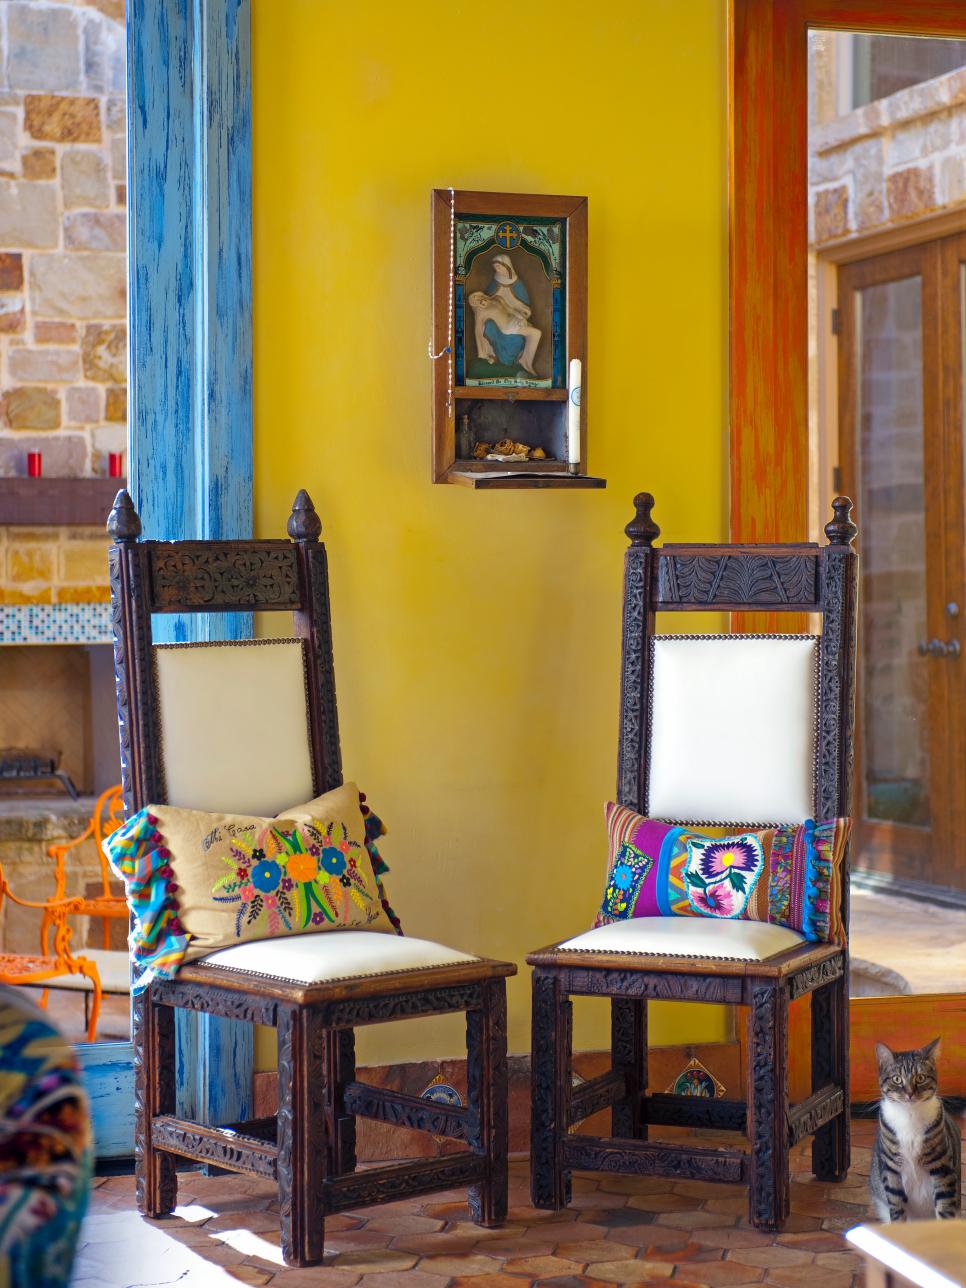 Antique Carved Chairs in Mediterranean-Style Yellow Room